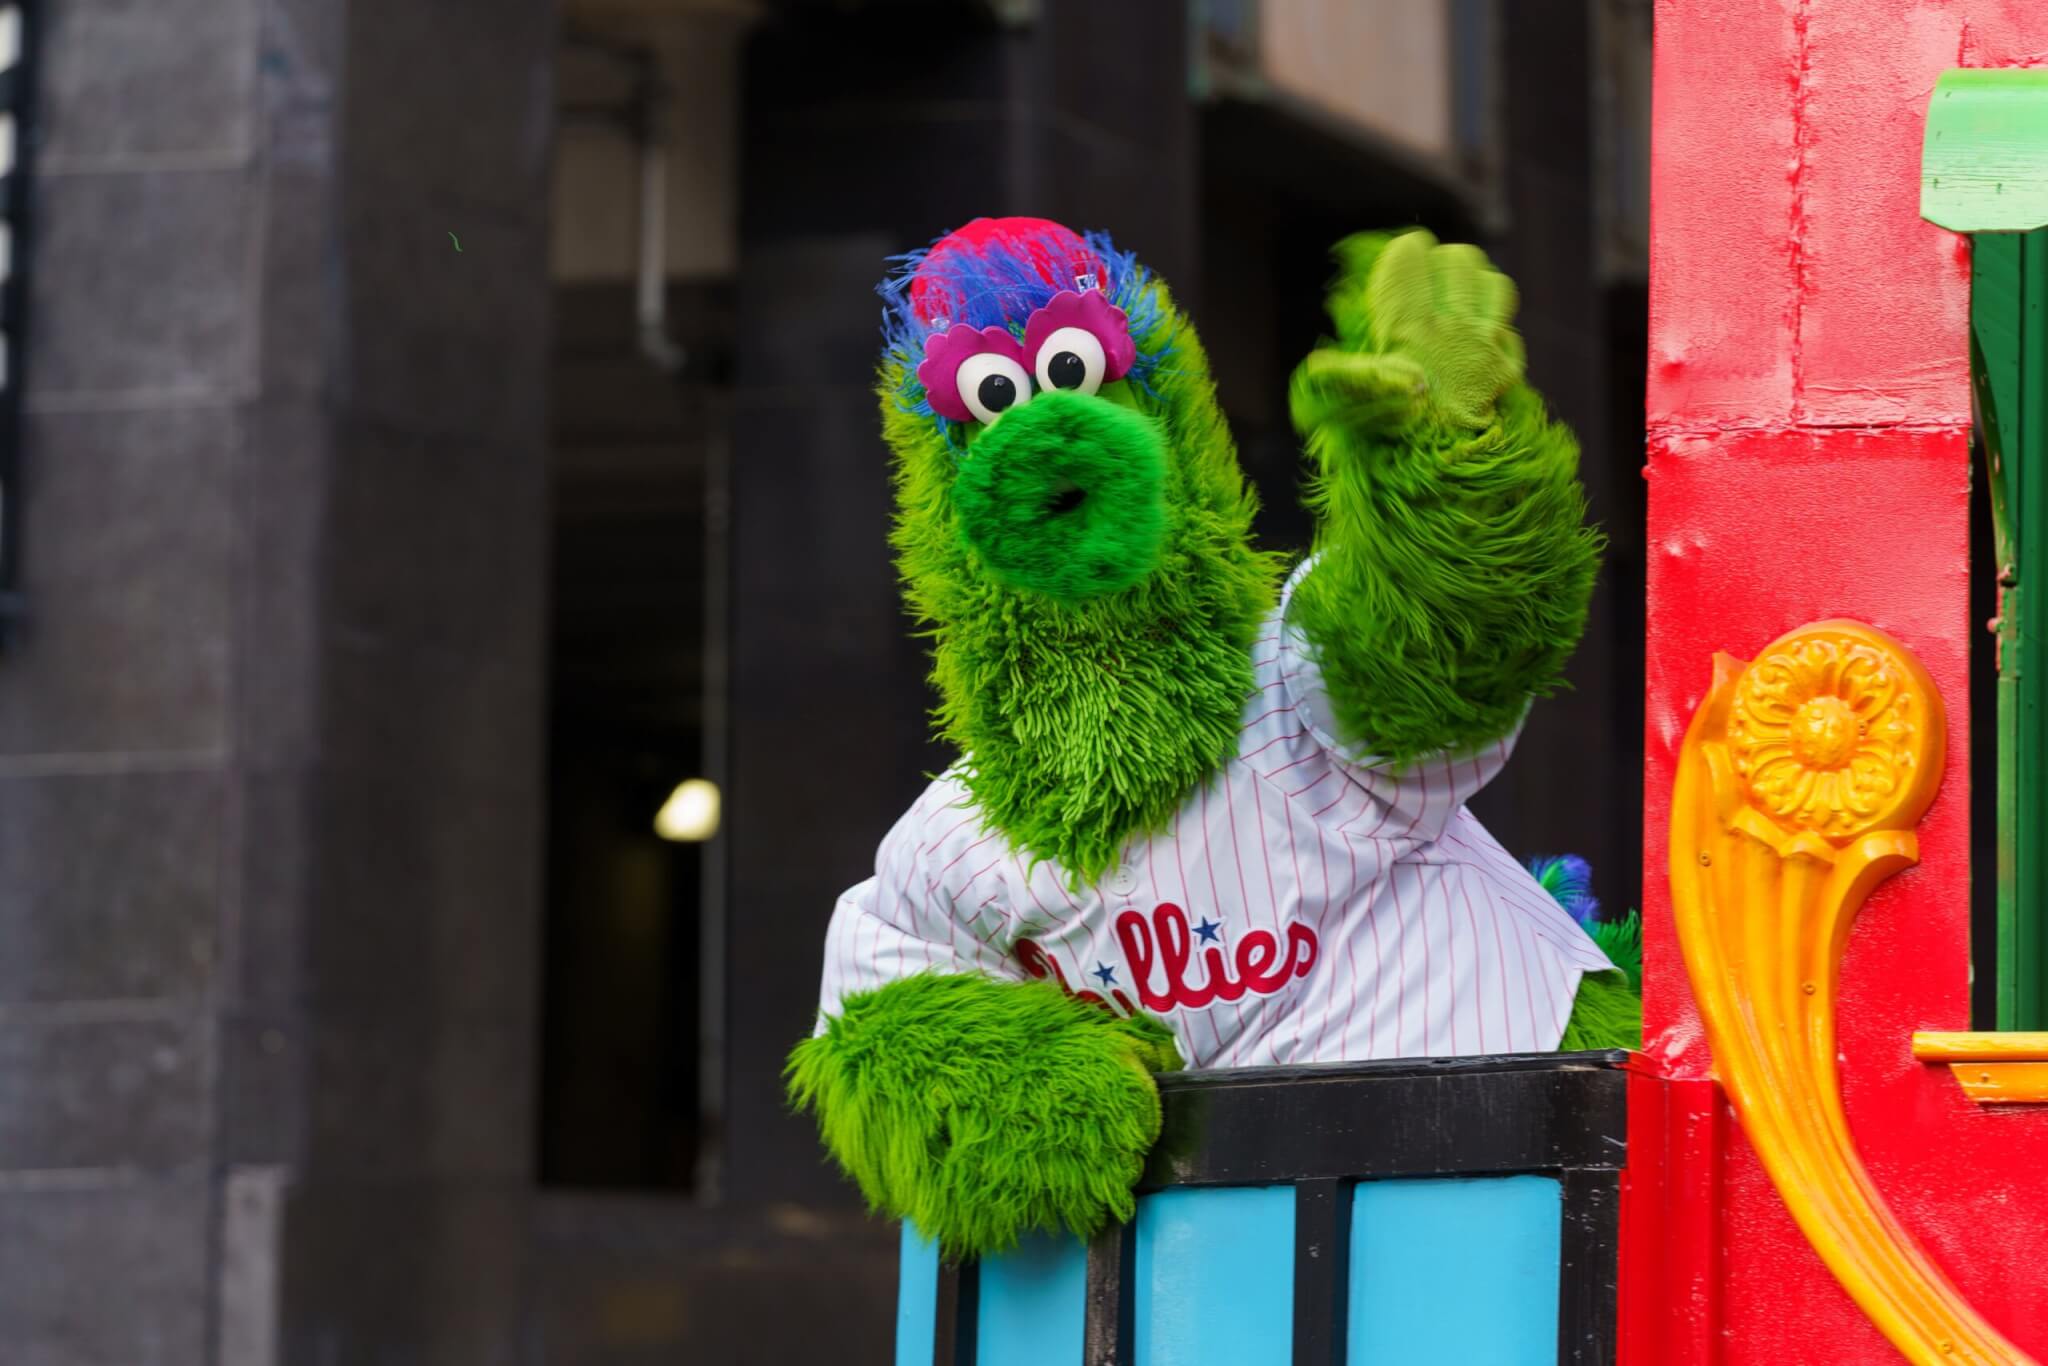 The Philly Phanatic waving to fans 